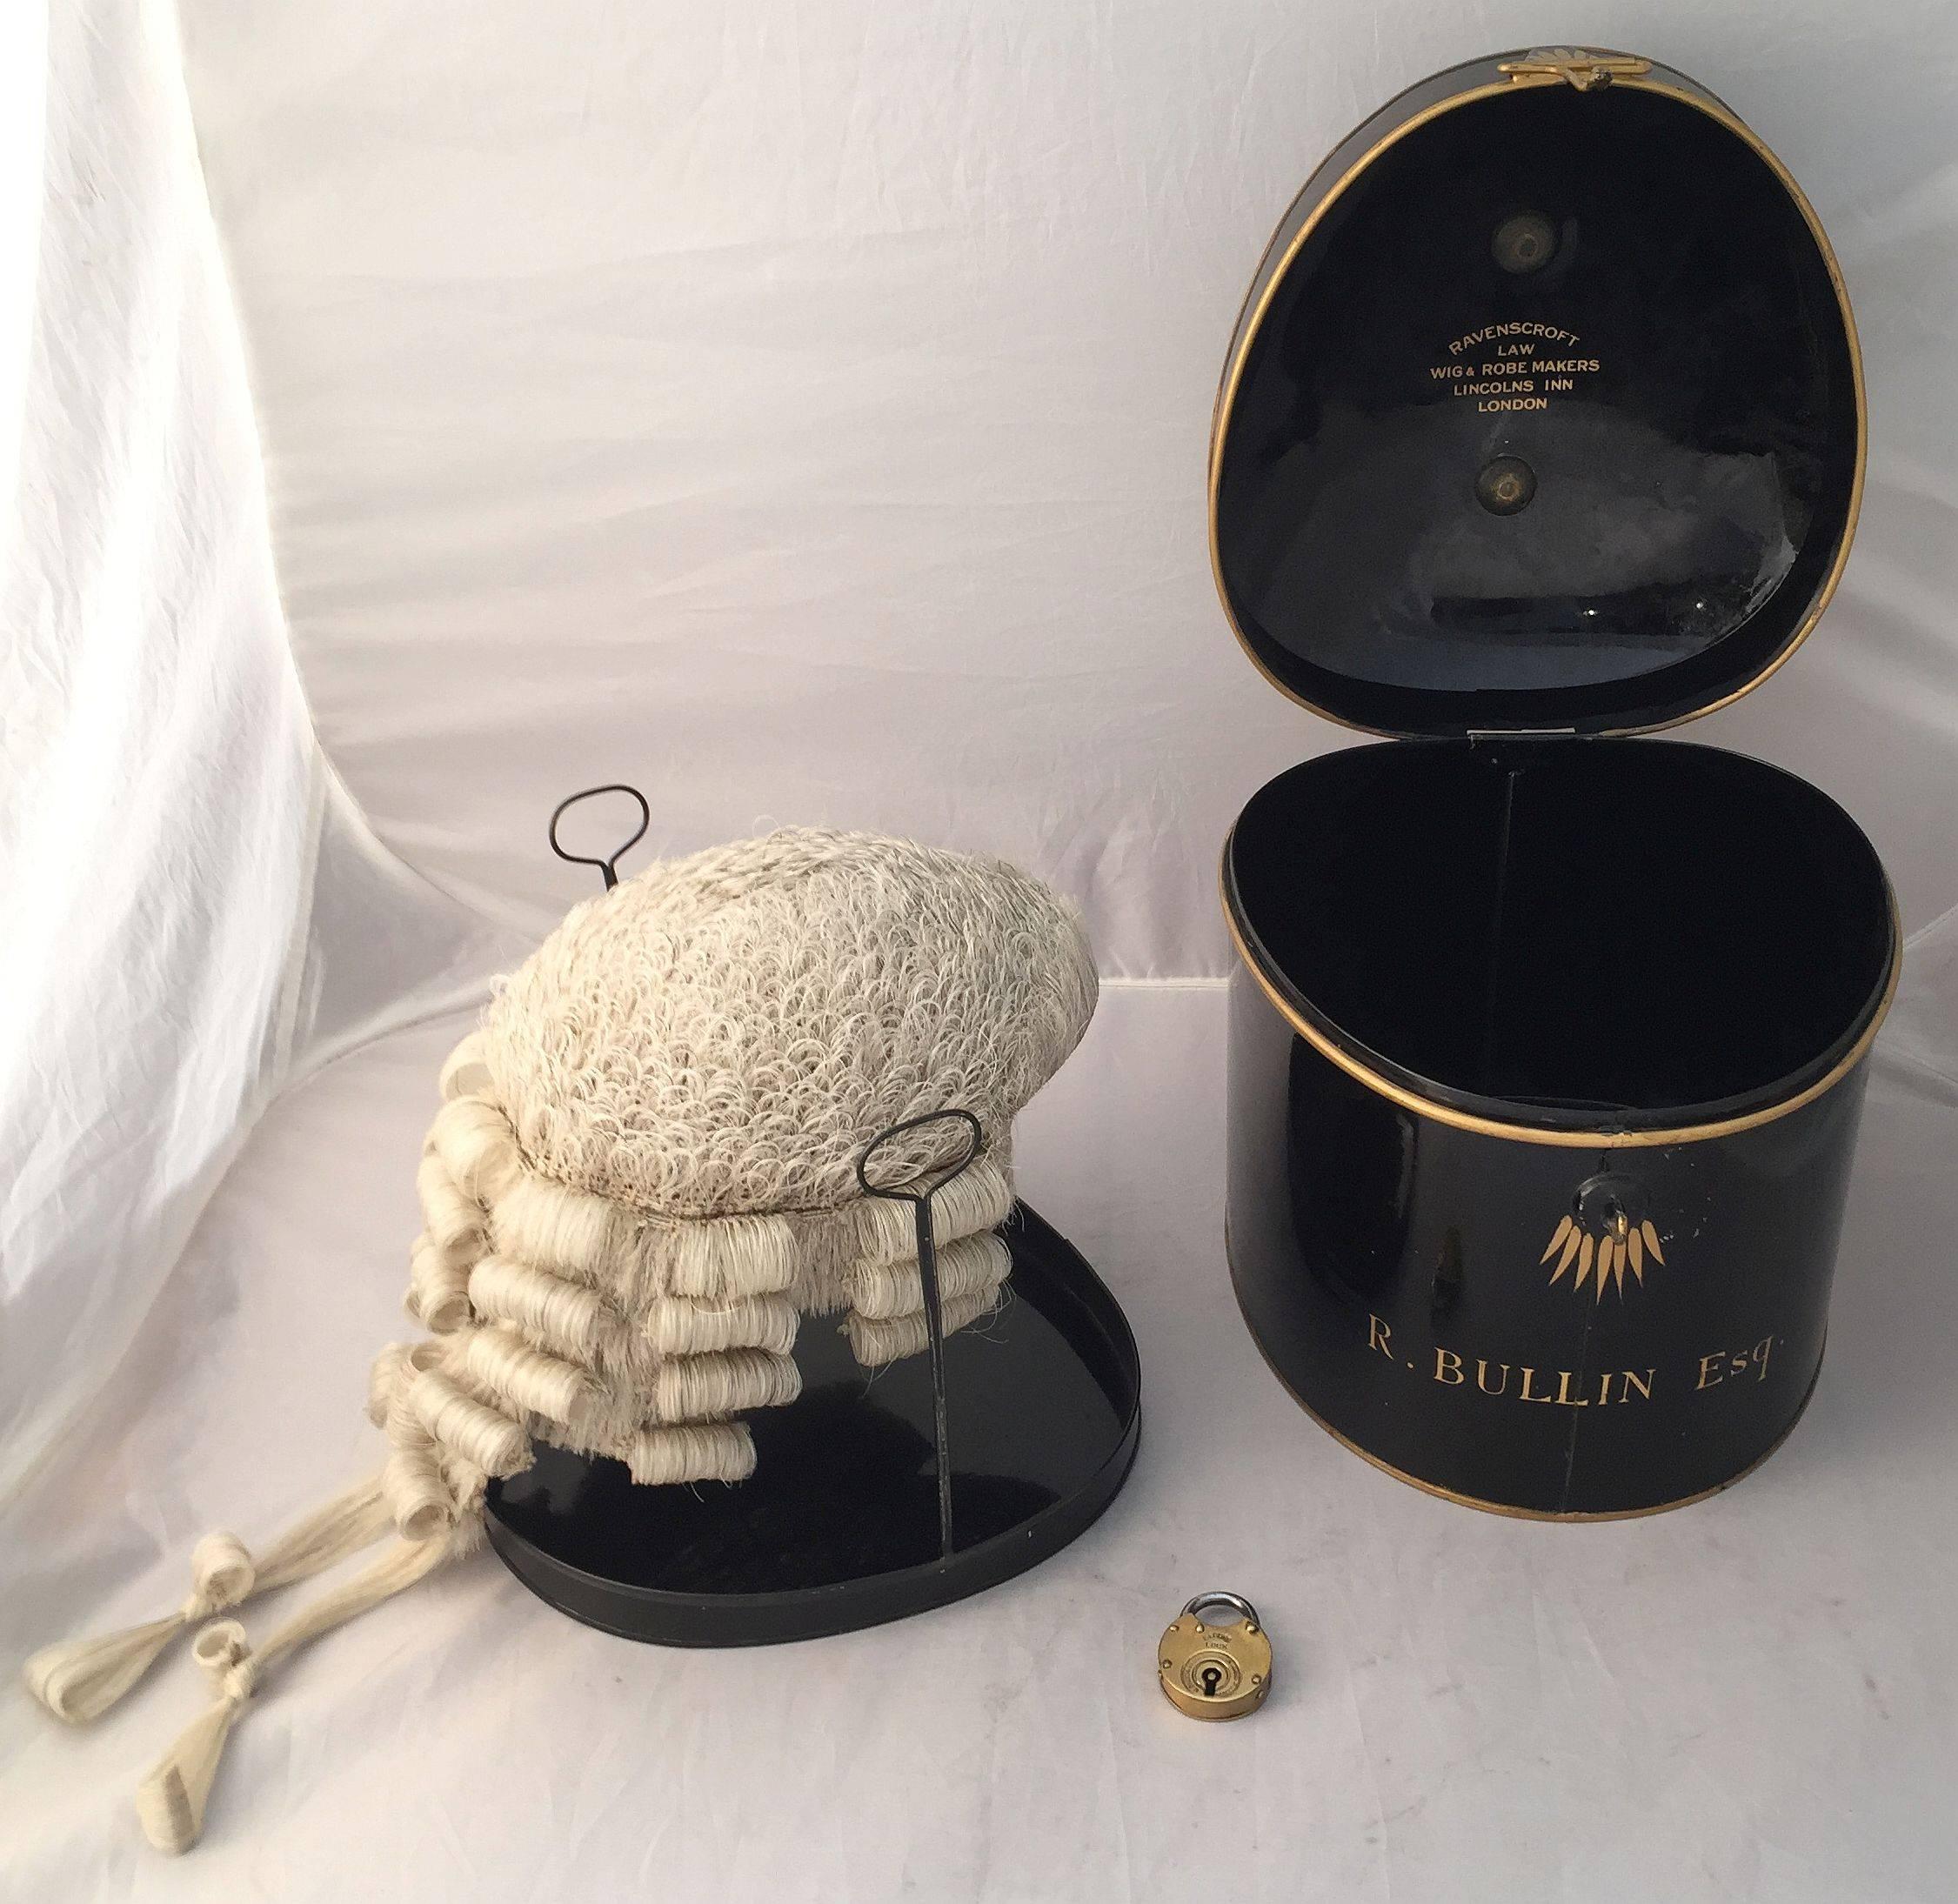 An English barrister’s wig of woven horse hair in original tole box with lock and key, circa 1850-1890, featuring a barrister’s wig with accompanying riser, in a fitted black tole box with gold accents and brass swan handle, the exterior marked 'R.